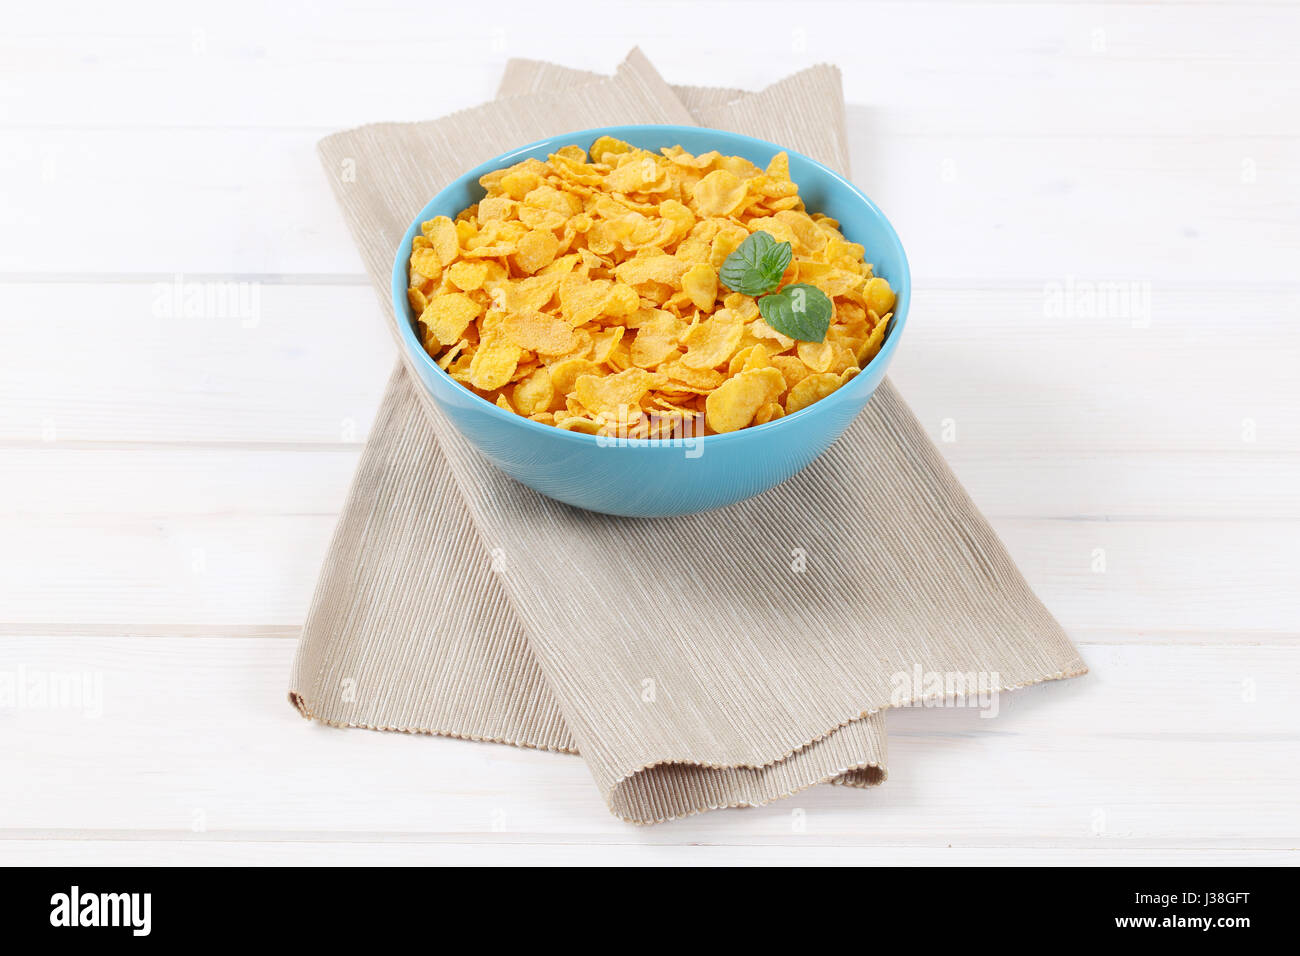 bowl of corn flakes on beige place mat Stock Photo